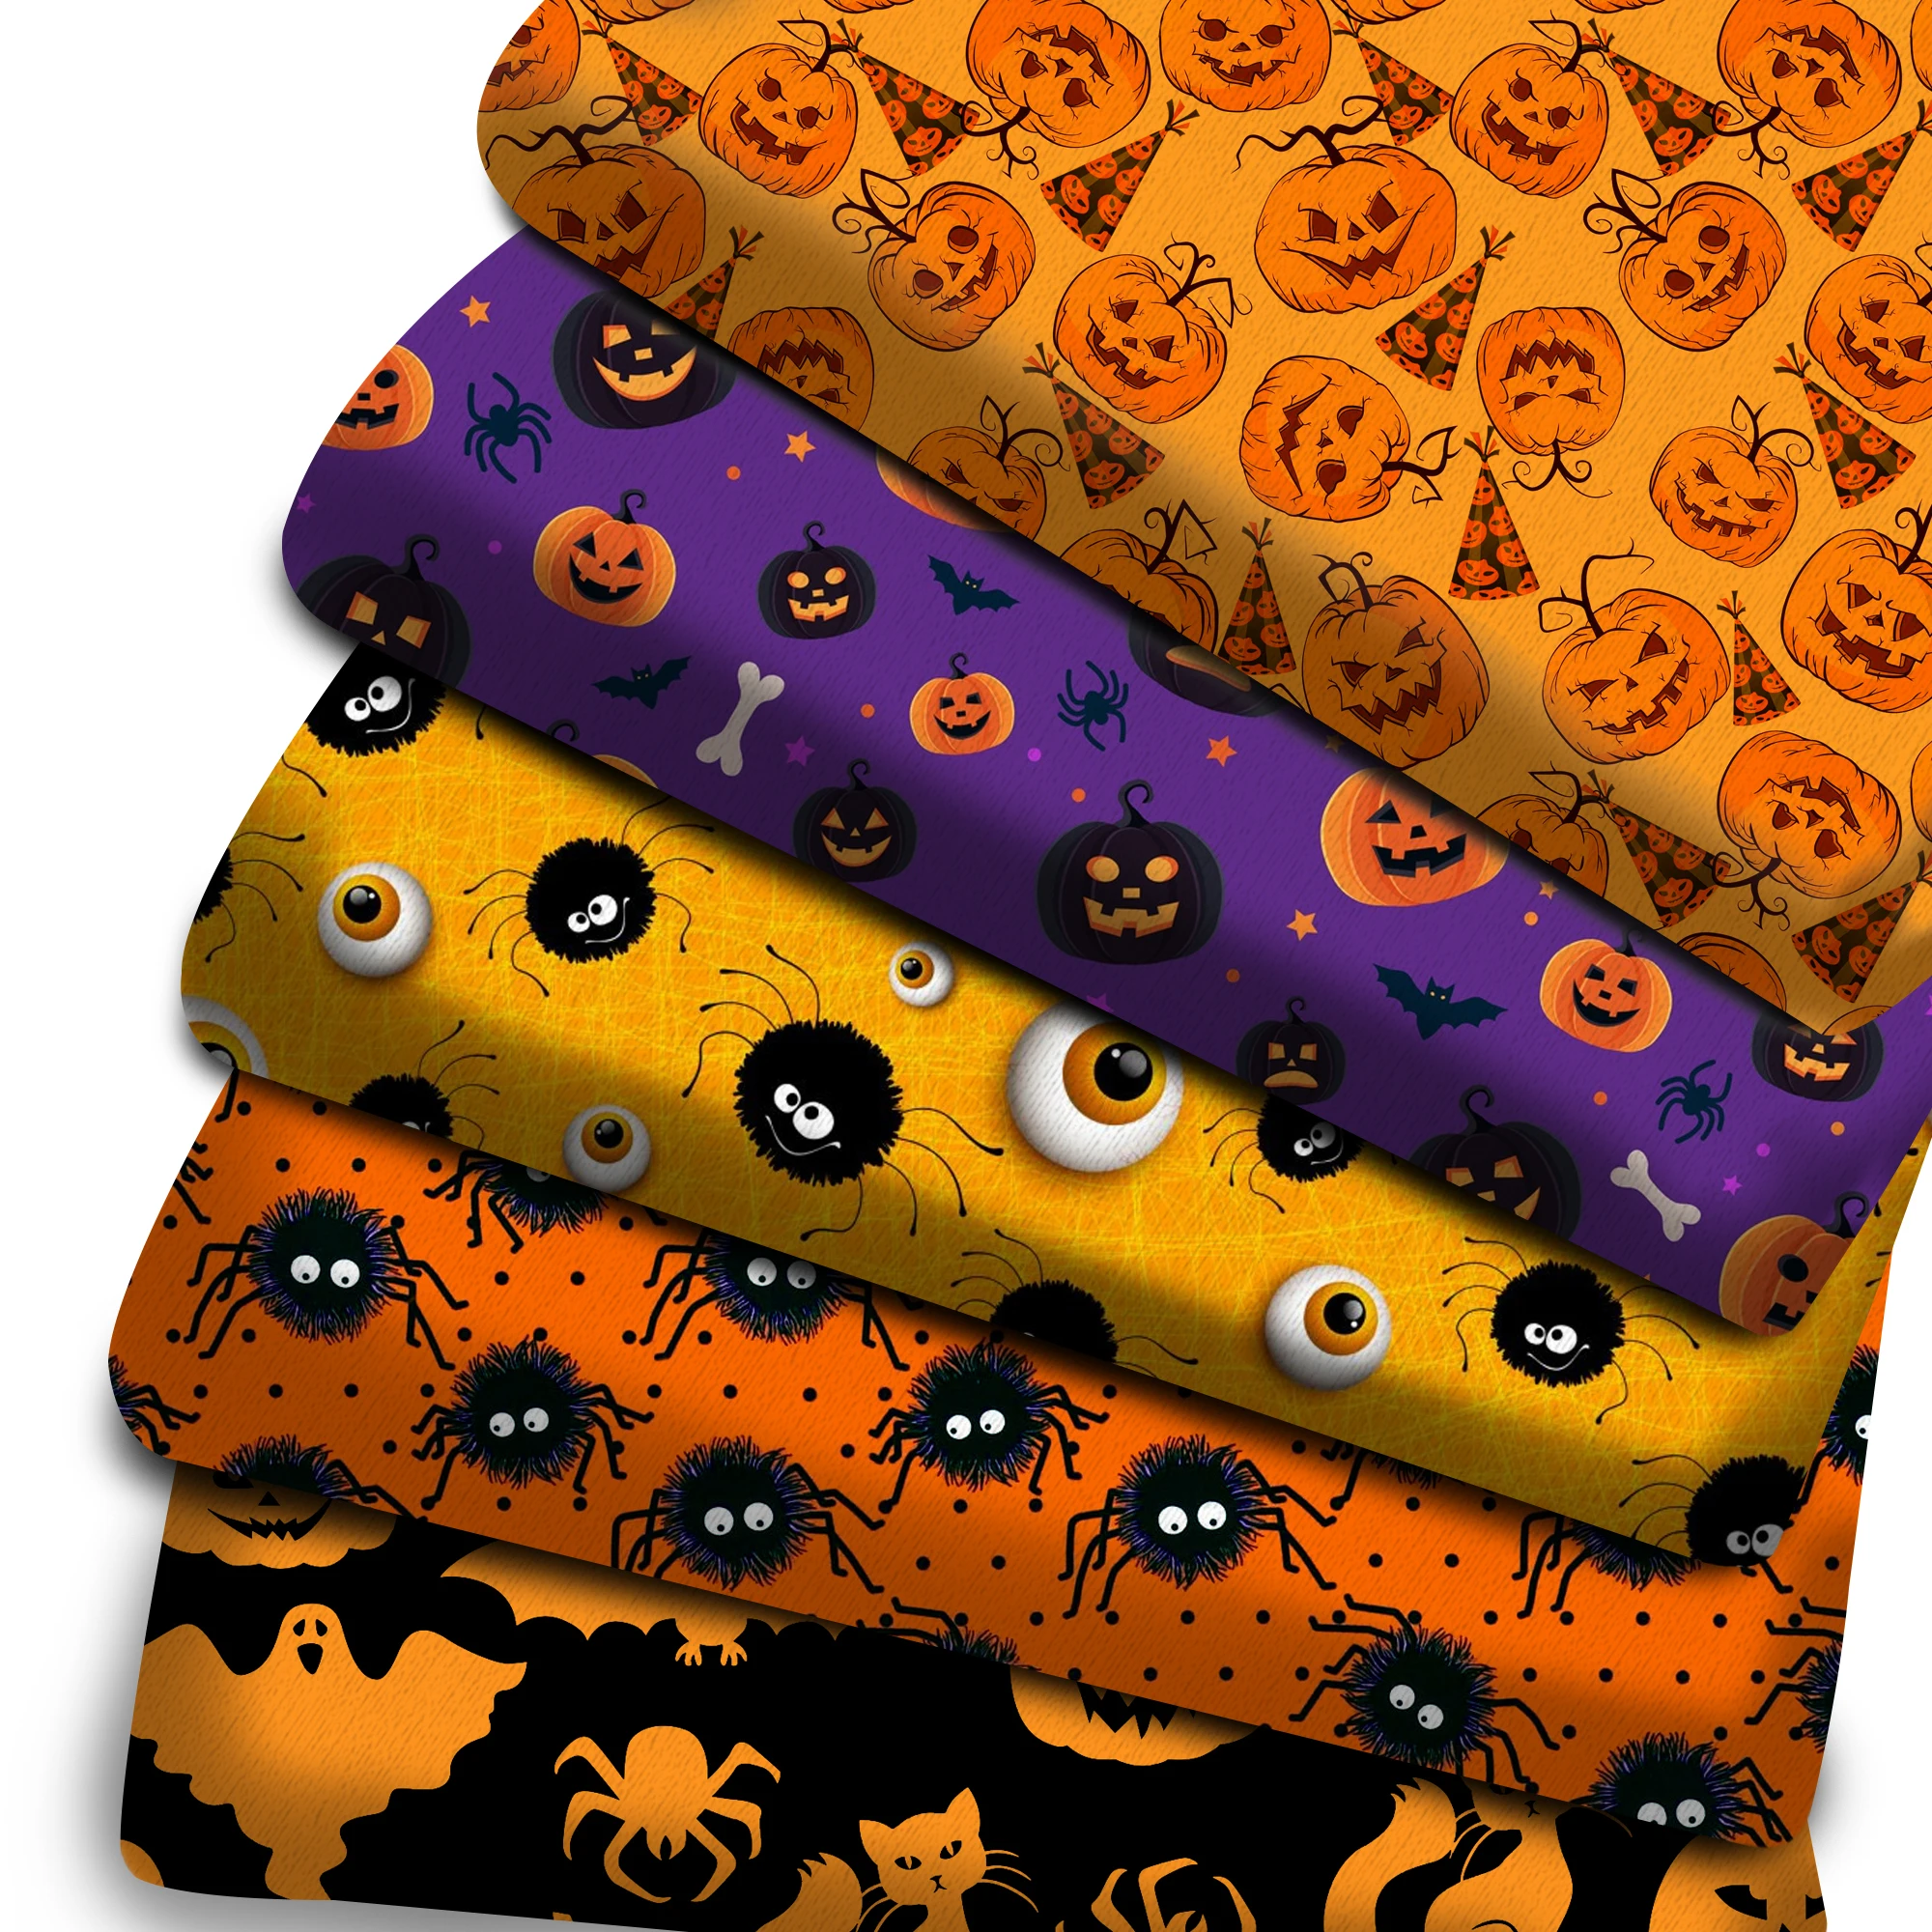 Halloween Pumpkin Polyester Cotton/Pure Cotton Fabric Patchwork for Tissue Sewing Quilting Fabrics Needlework Material  50*145cm